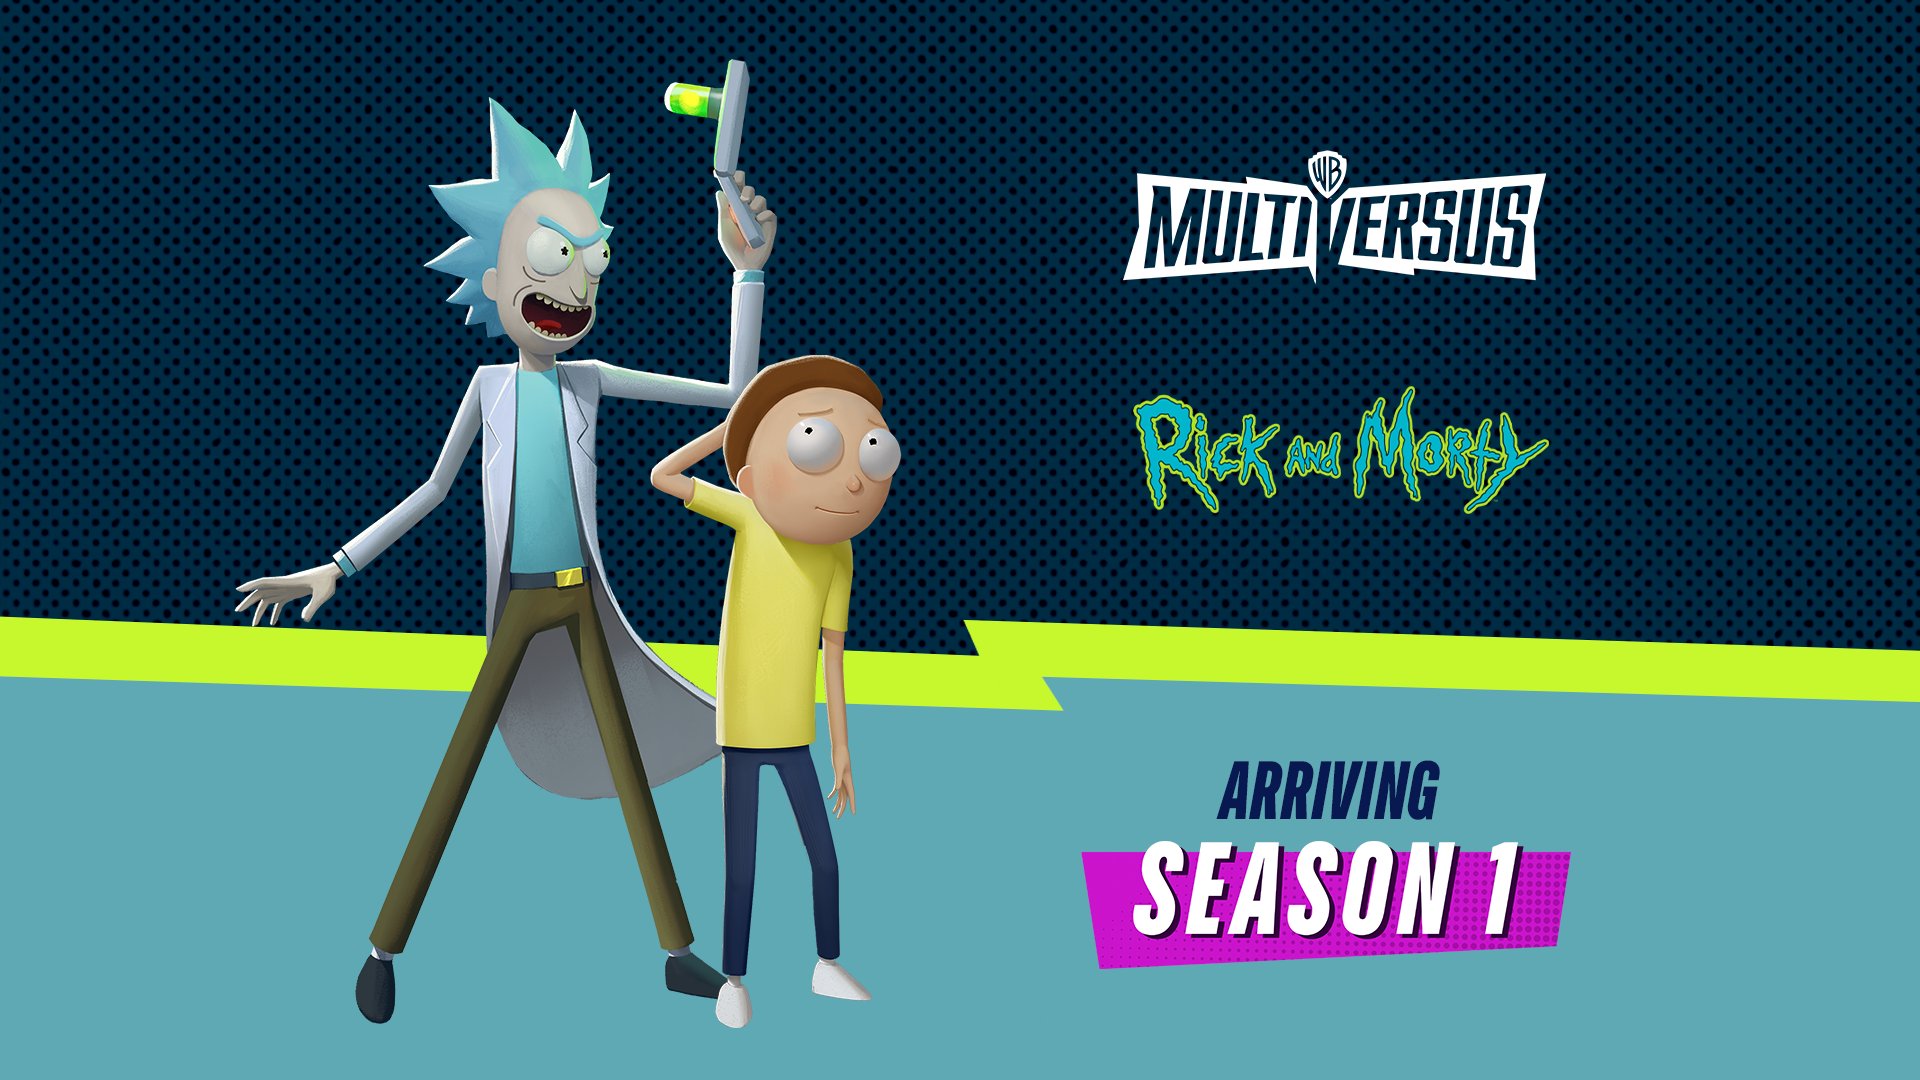 MultiVersus do Lebron and Rick & Morty have in common? They're both joining #MultiVersus! Lebron swings in July 26th, and Rick & Morty arrive in Season 1. #SDCC